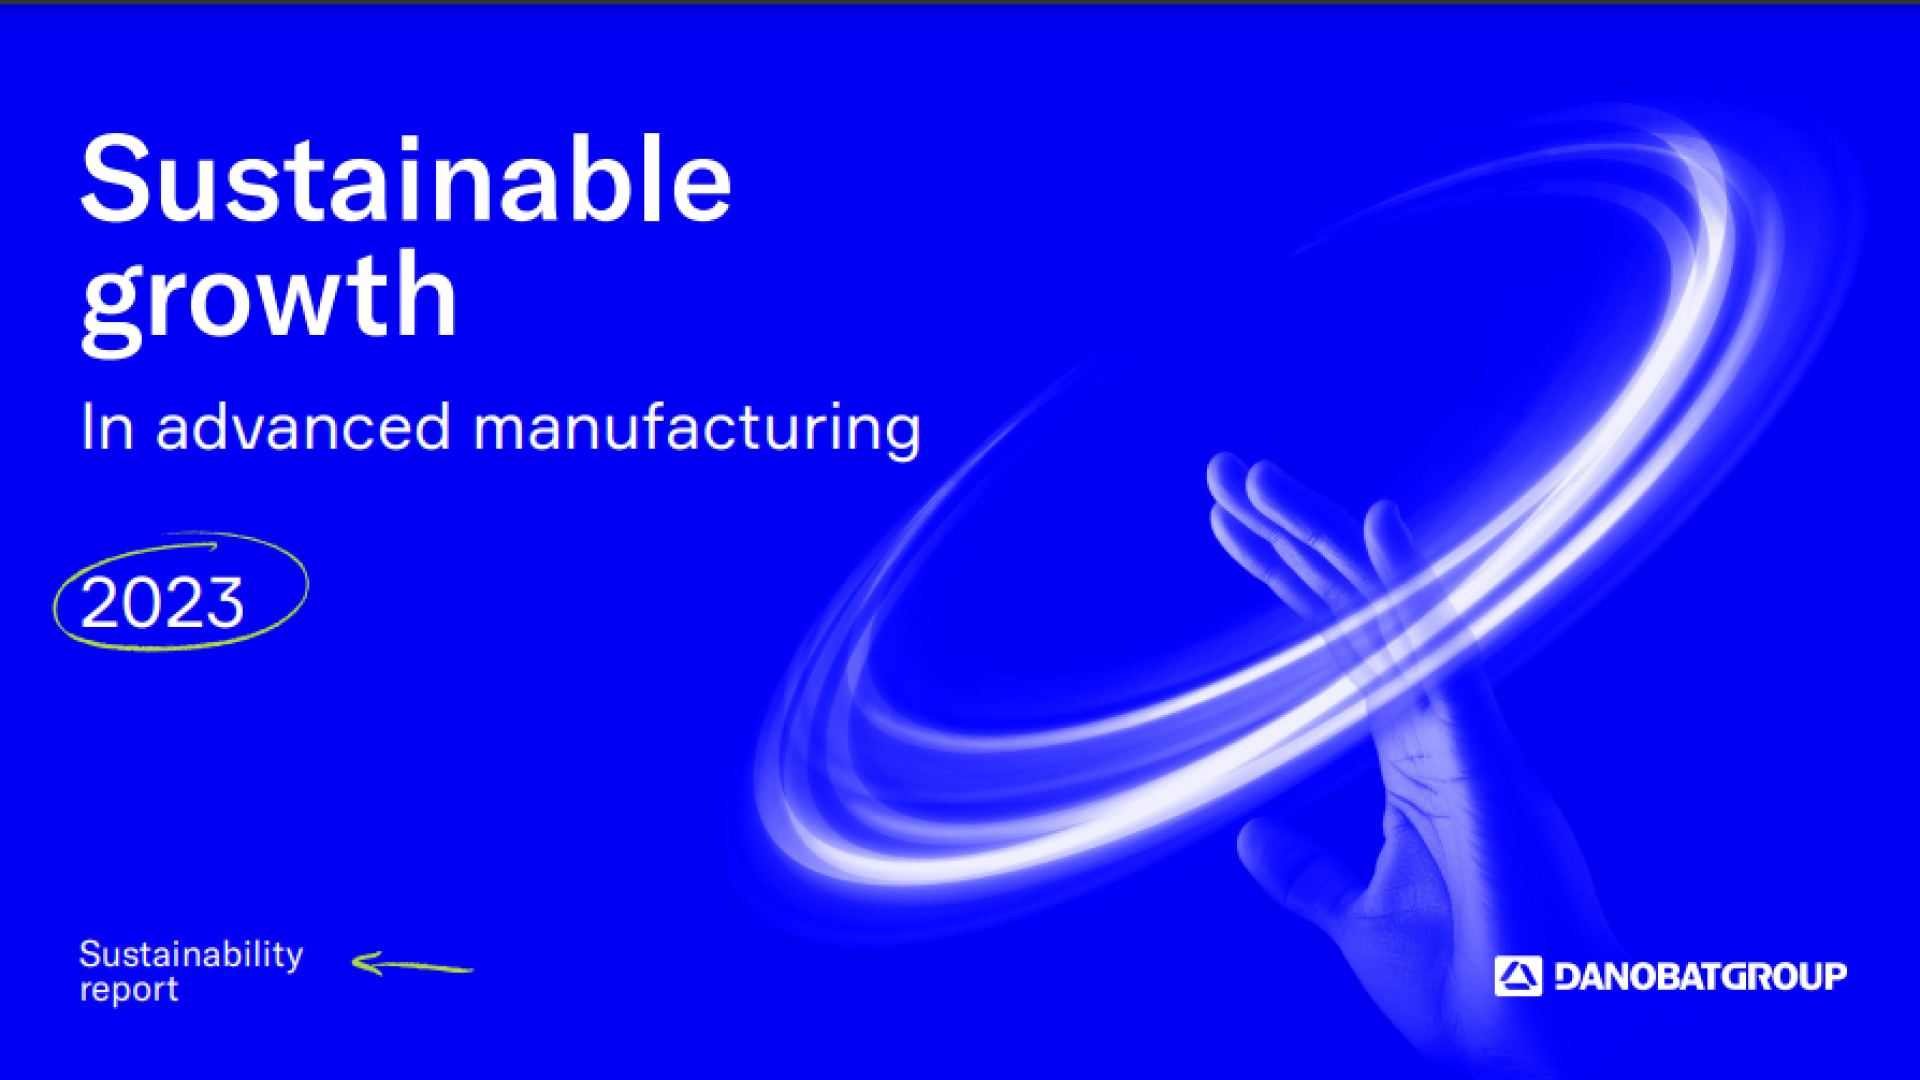 Danobatgroup’s continues its bid towards greater sustainability in advanced manufacturing